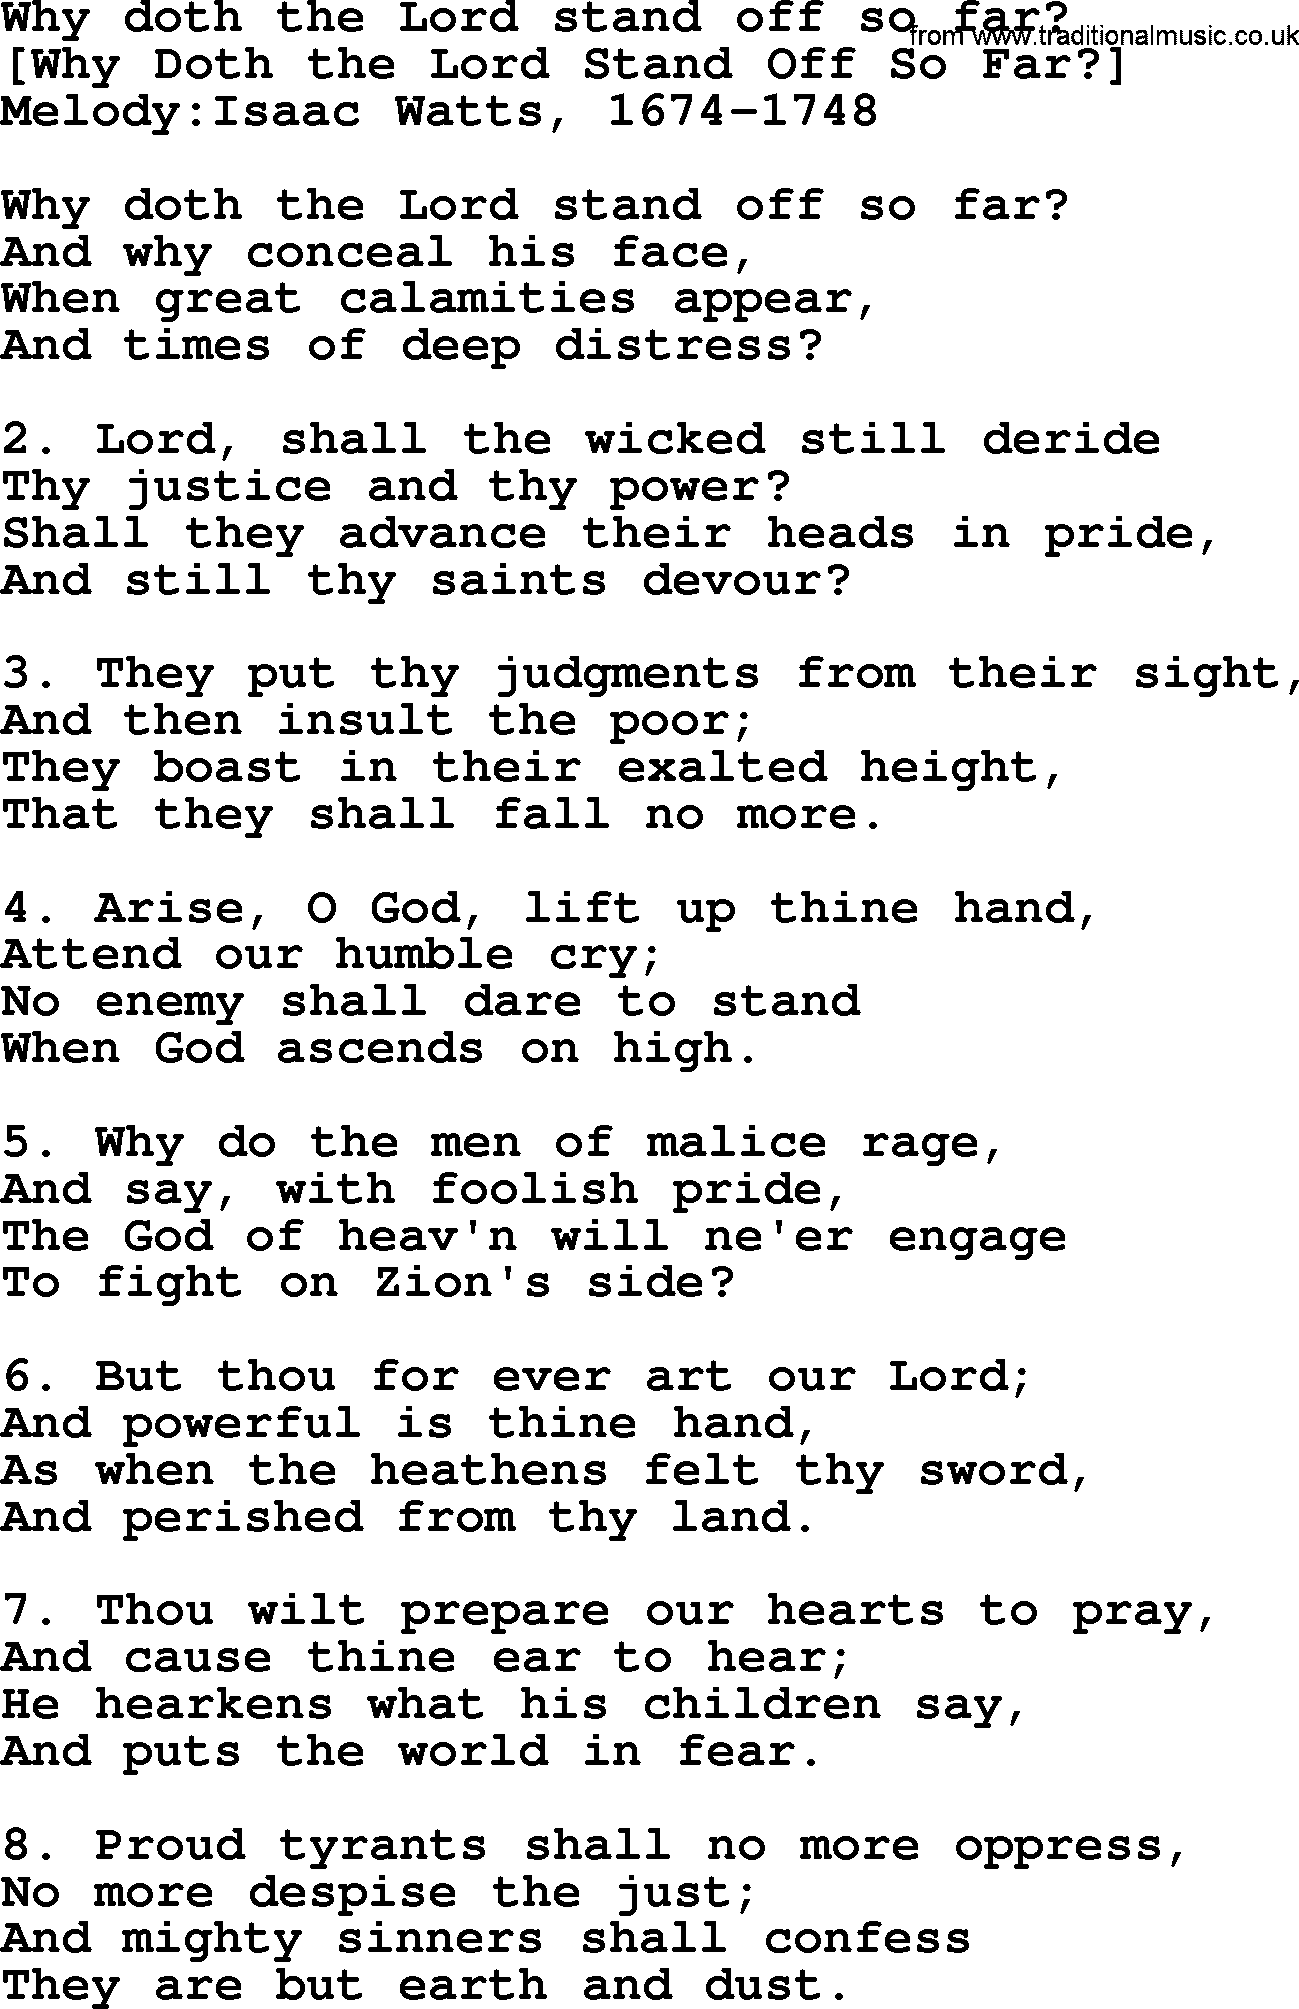 Old English Song: Why Doth The Lord Stand Off So Far lyrics